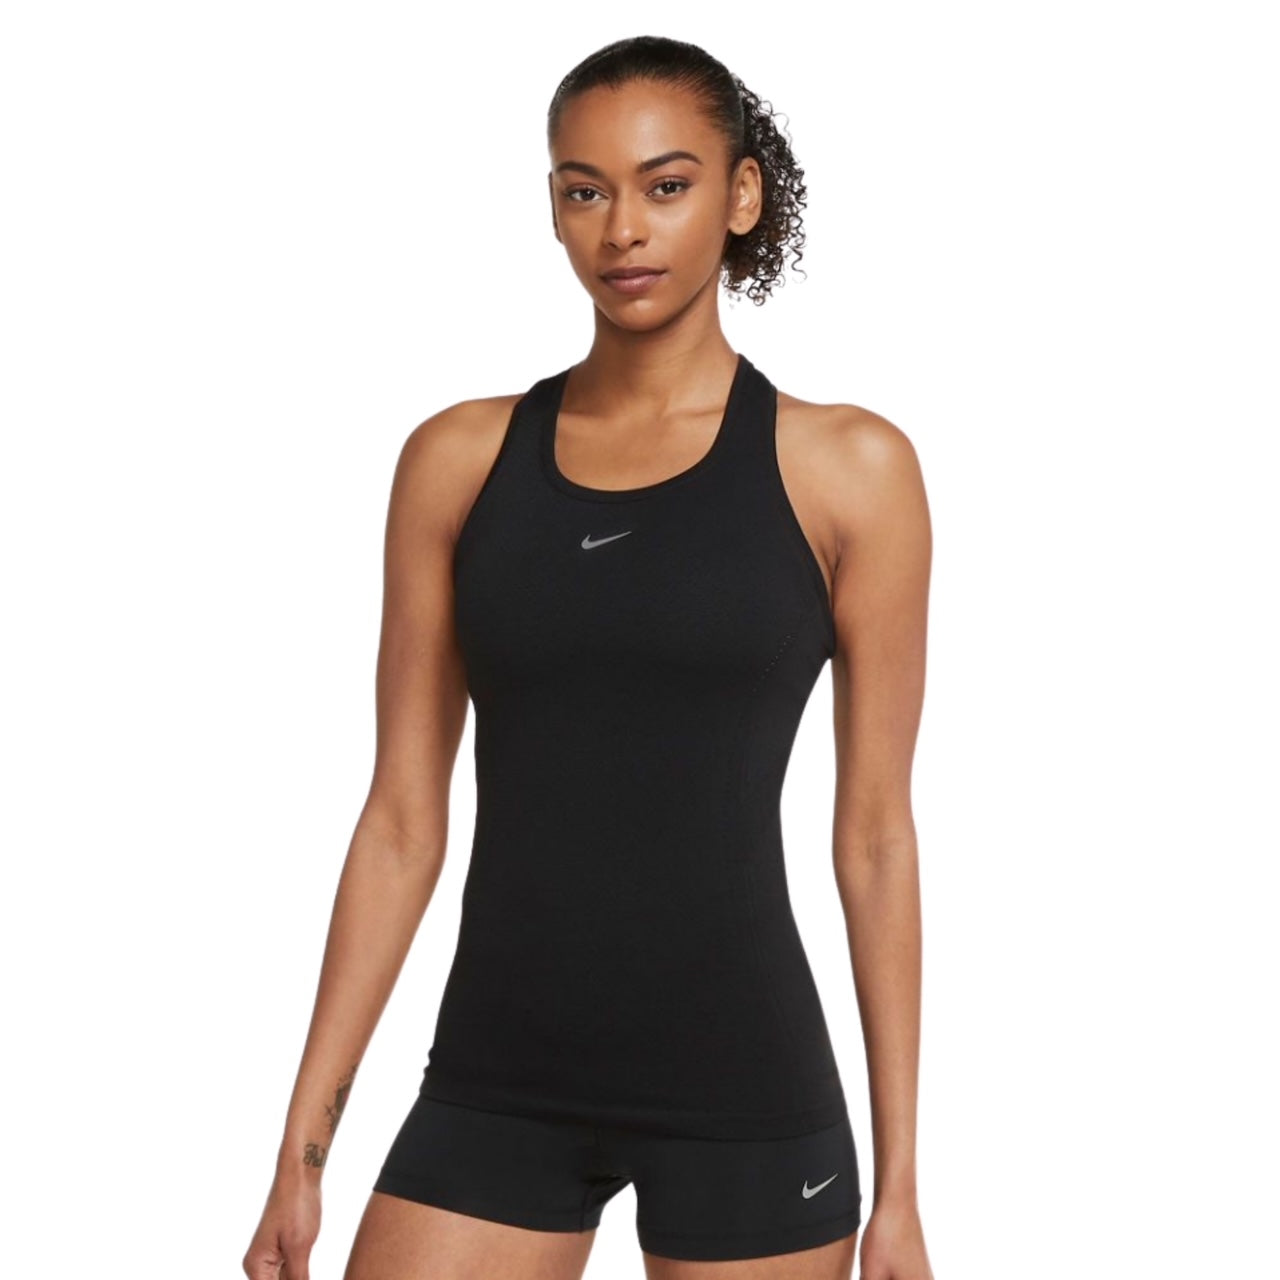 Nike Women's Dri-Fit Infinite Tank Top BV3909 500 Size Small Retail $65 New  with tag 